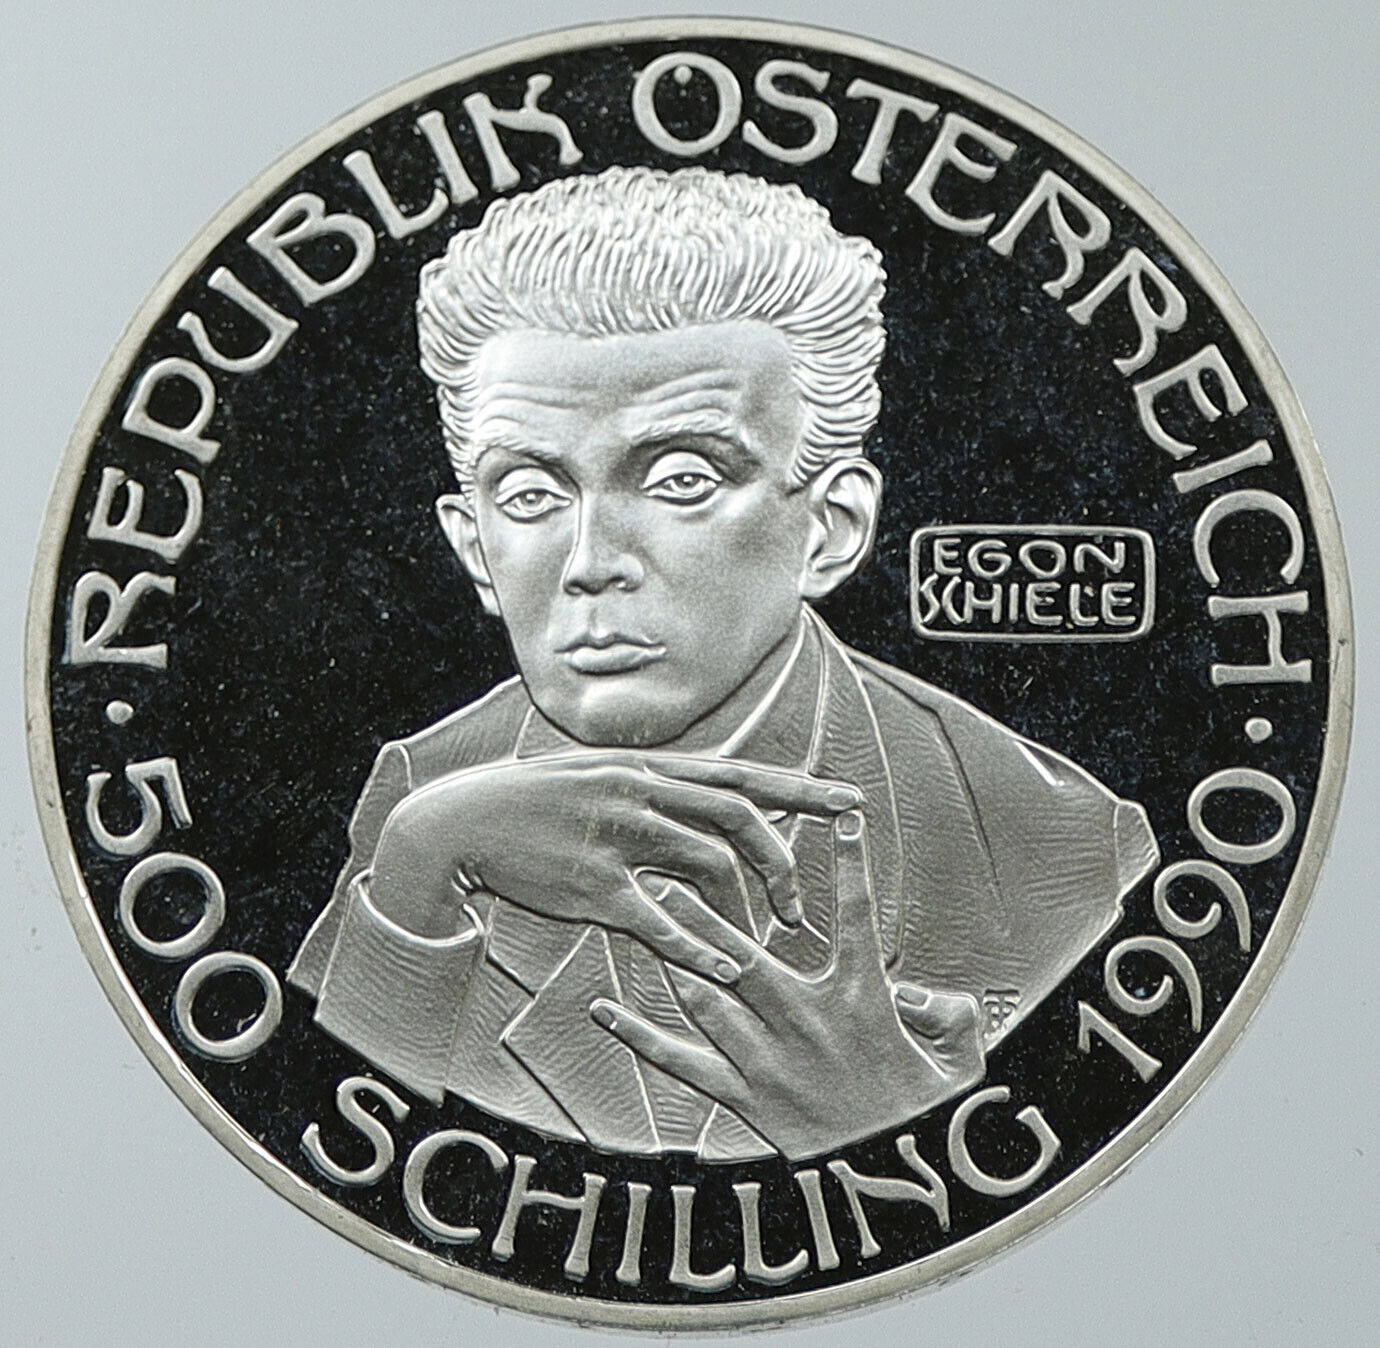 1990 AUSTRIA Expressionist PAINTER EGON SCHIELE Silver Proof Coin MOTHER i116625